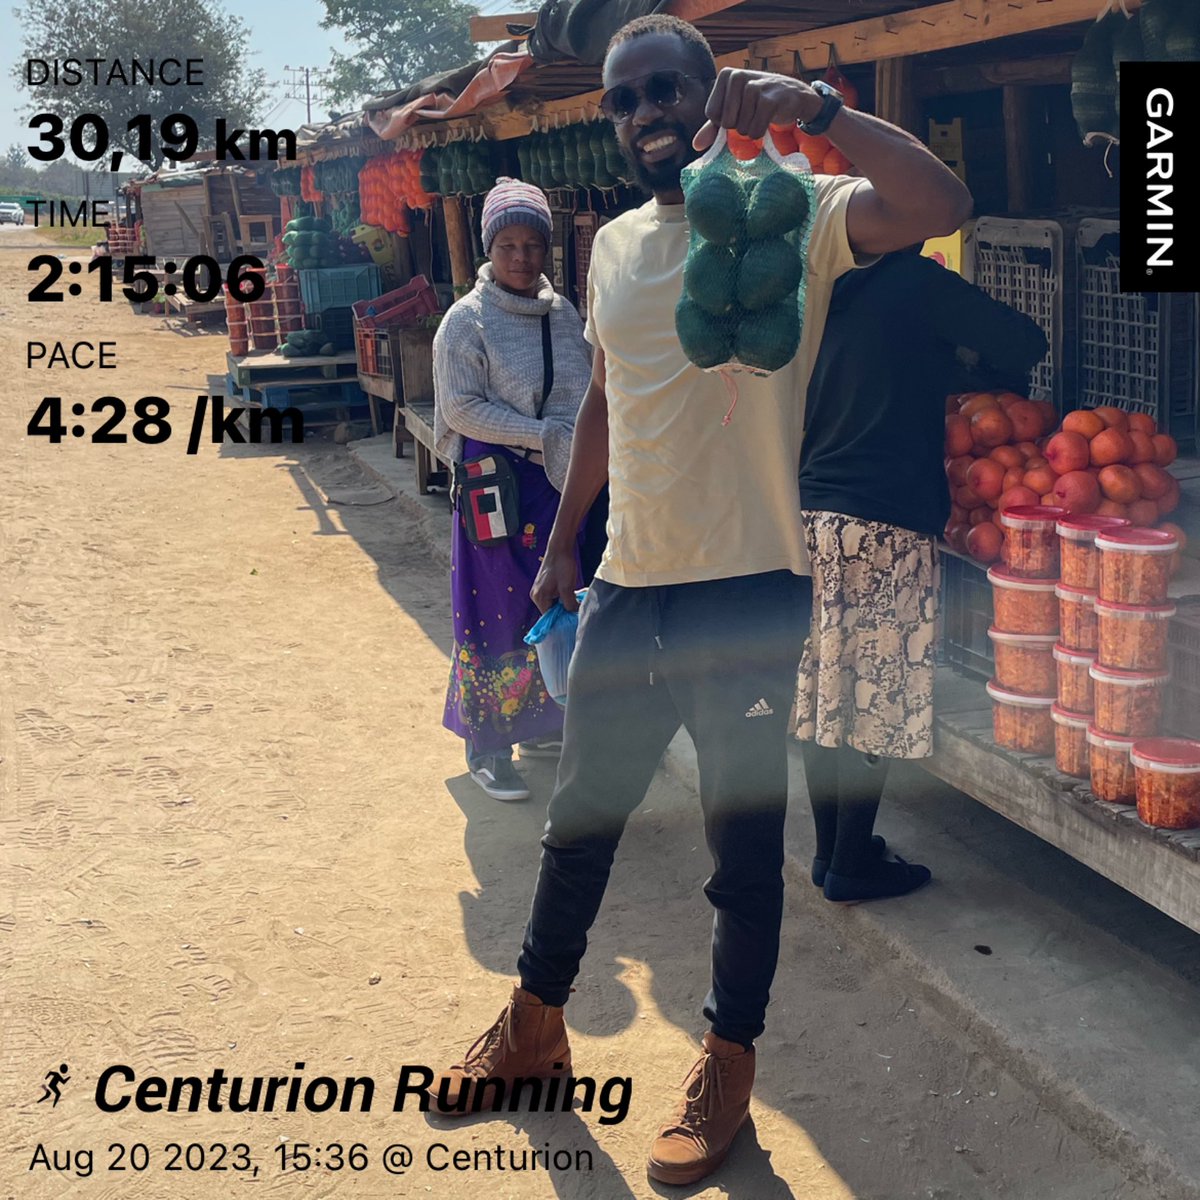 Week 9 didn’t go according to the plan but I’m still on track for my marathon target. The body is starting to respond well. I’m looking forward to the next four weeks which will focus more on speed work. #skhindigang #skhindigangcoaching